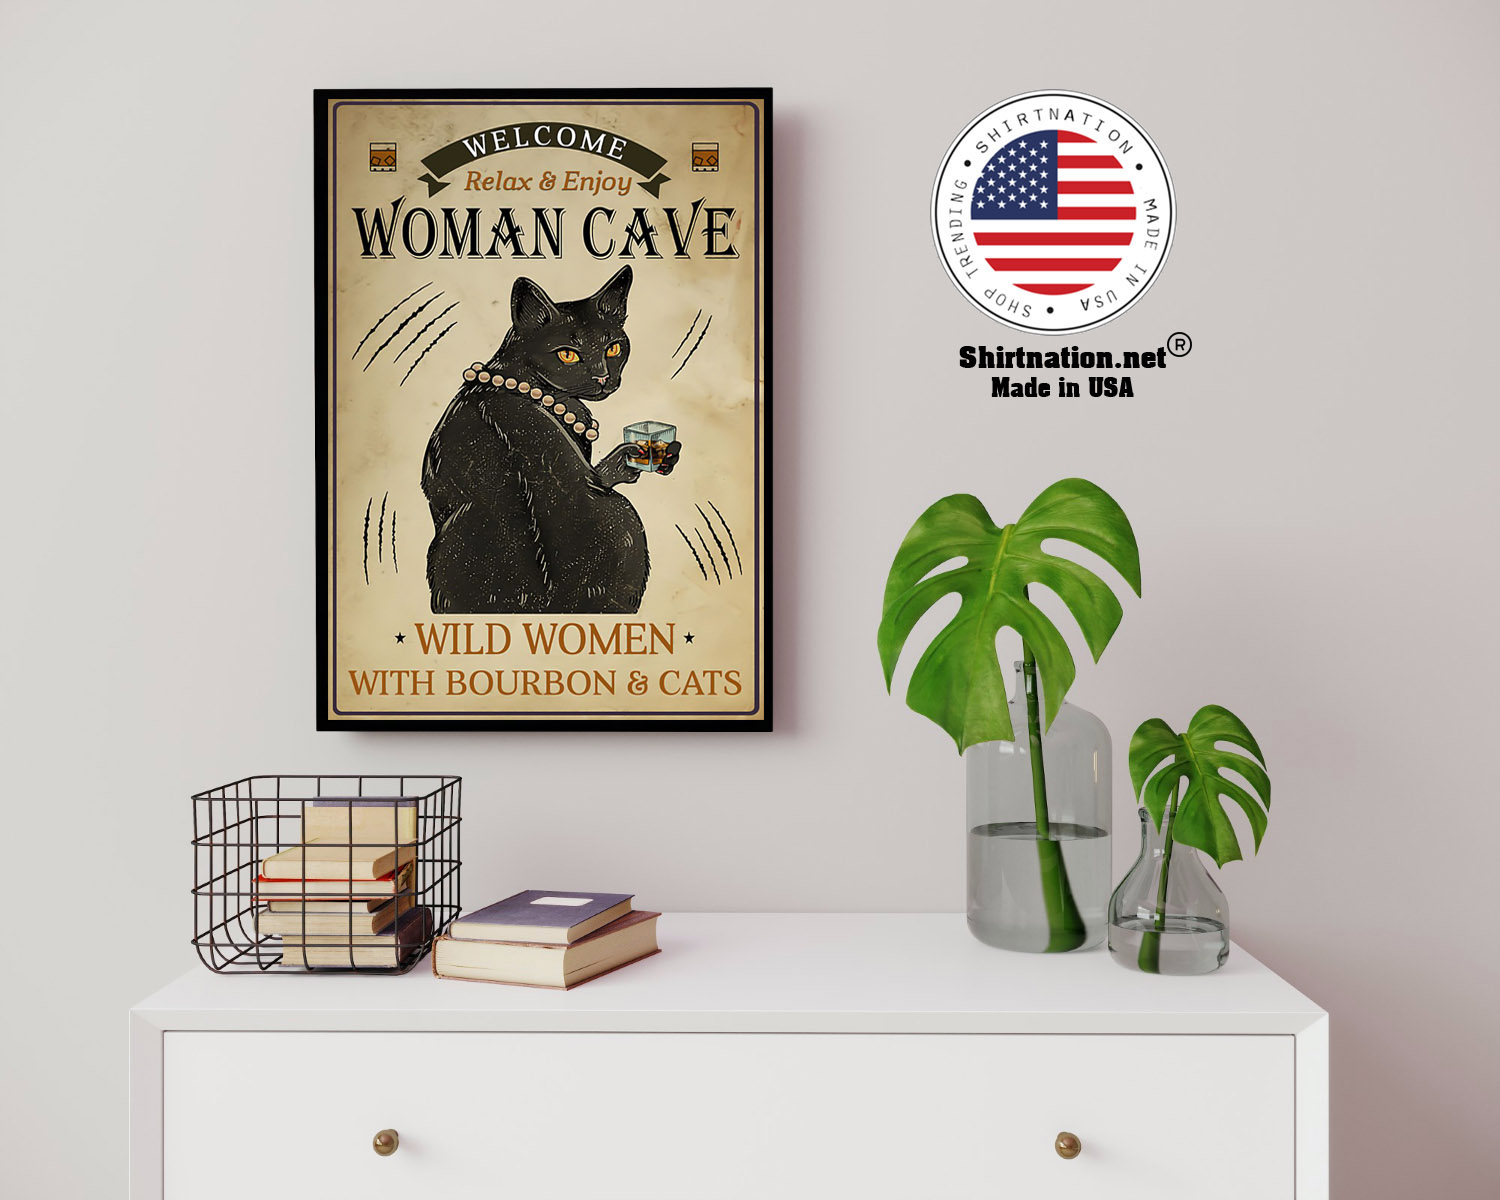 Welcome relax enjoy woman cave will women with bourbon and cats poster 14